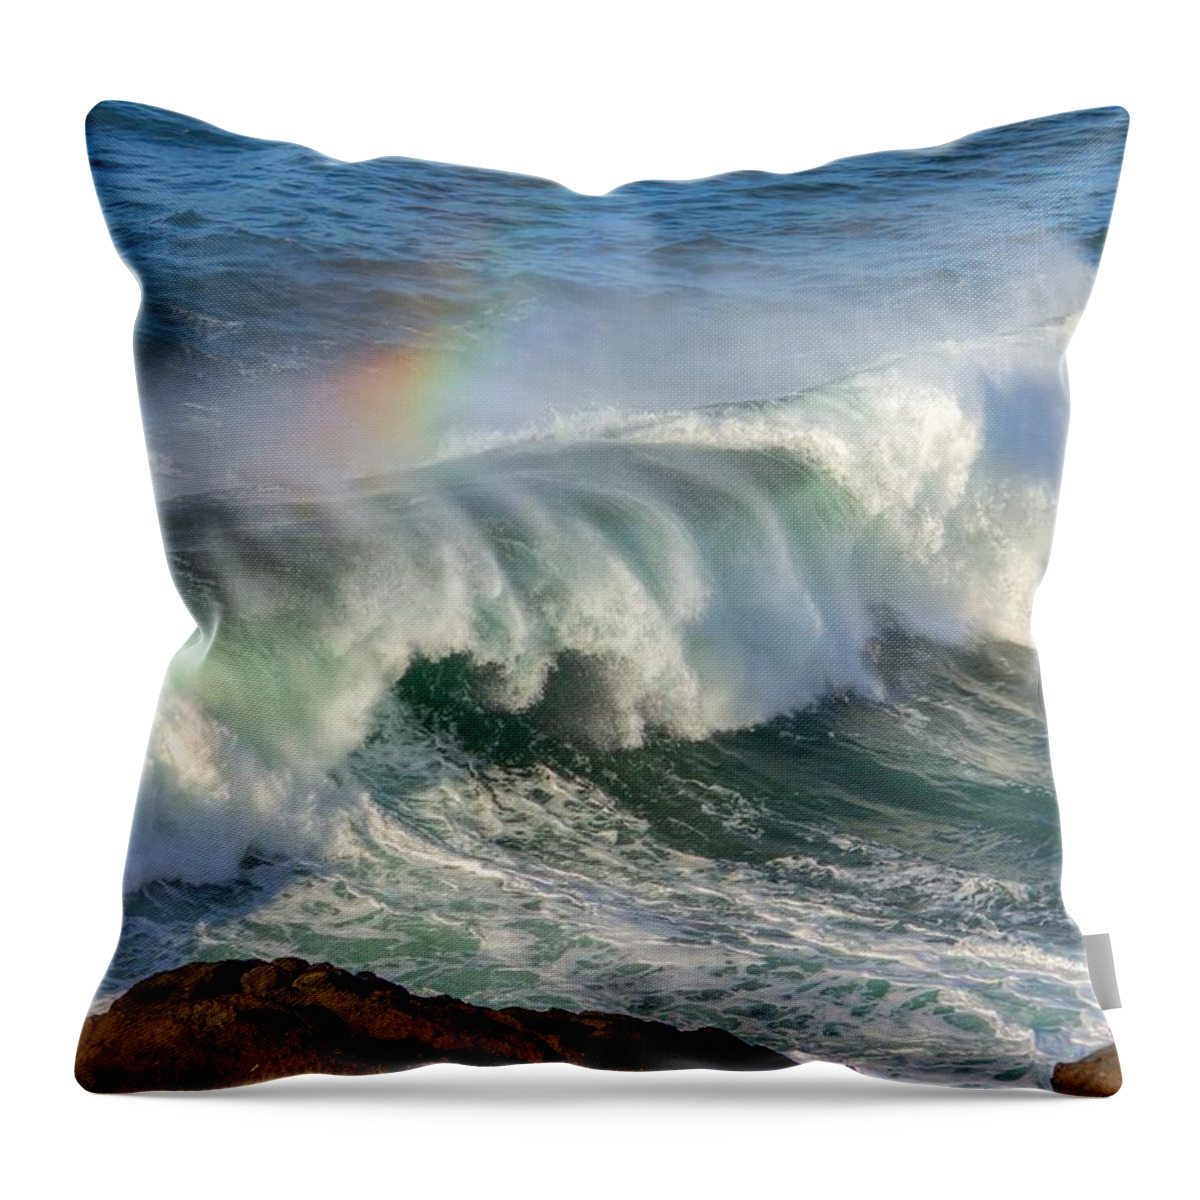 Breakers Throw Pillow featuring the photograph Rainbow Breakers 0071 by Kristina Rinell